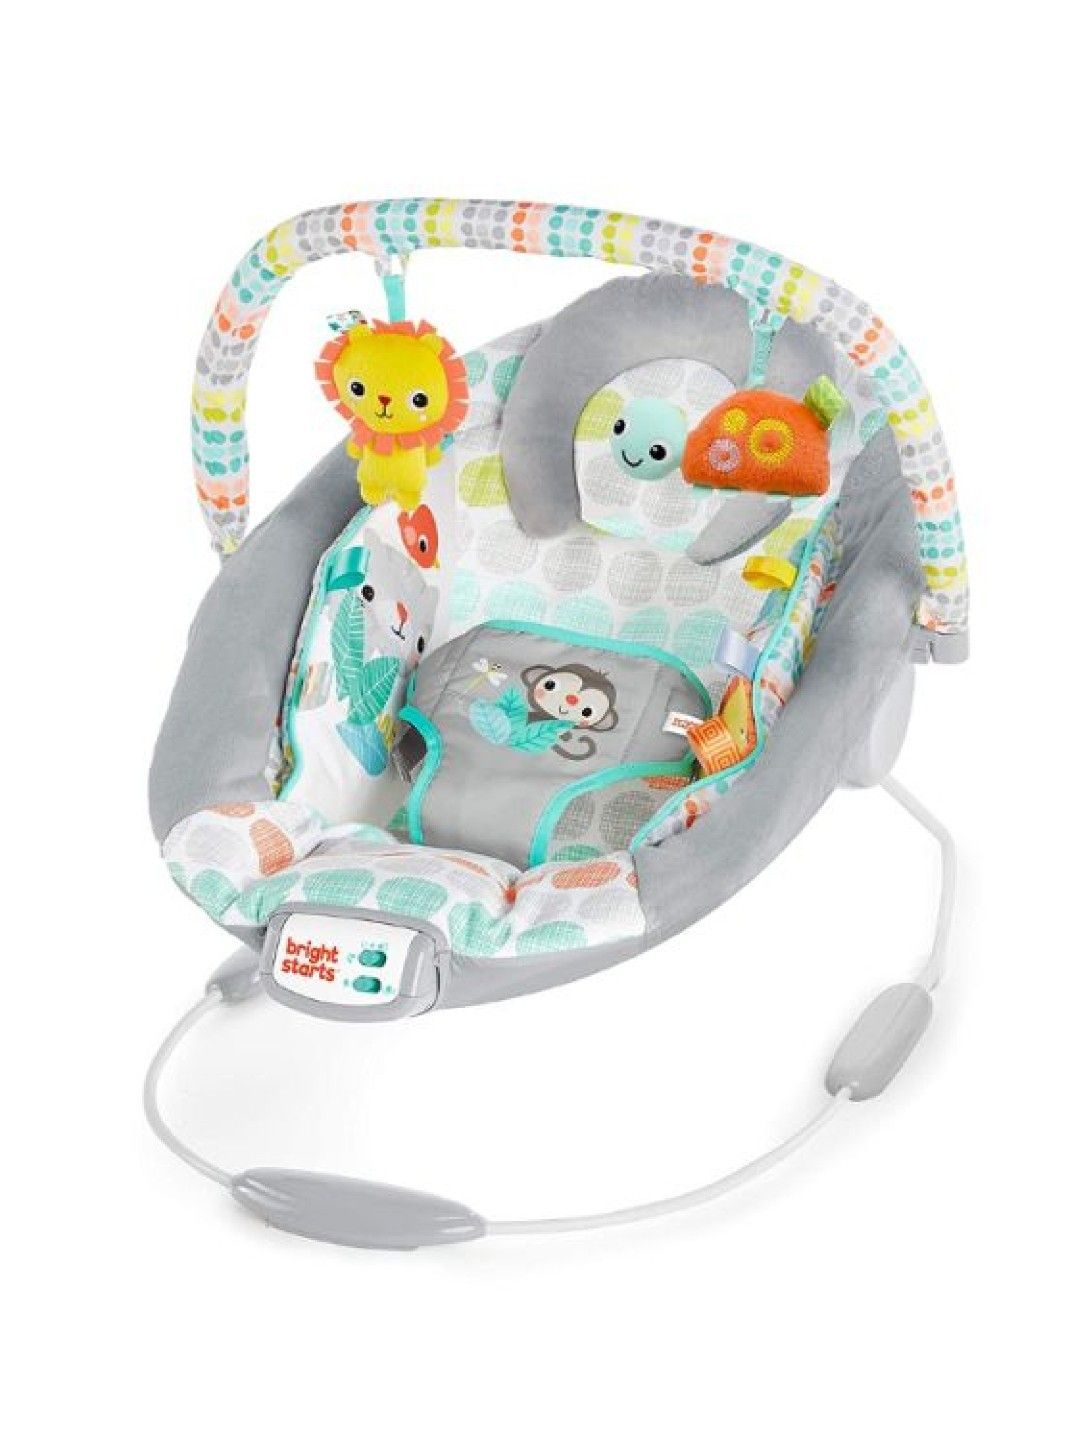 Bright Starts Whimsical Wild Comfy Baby Bouncer Seat